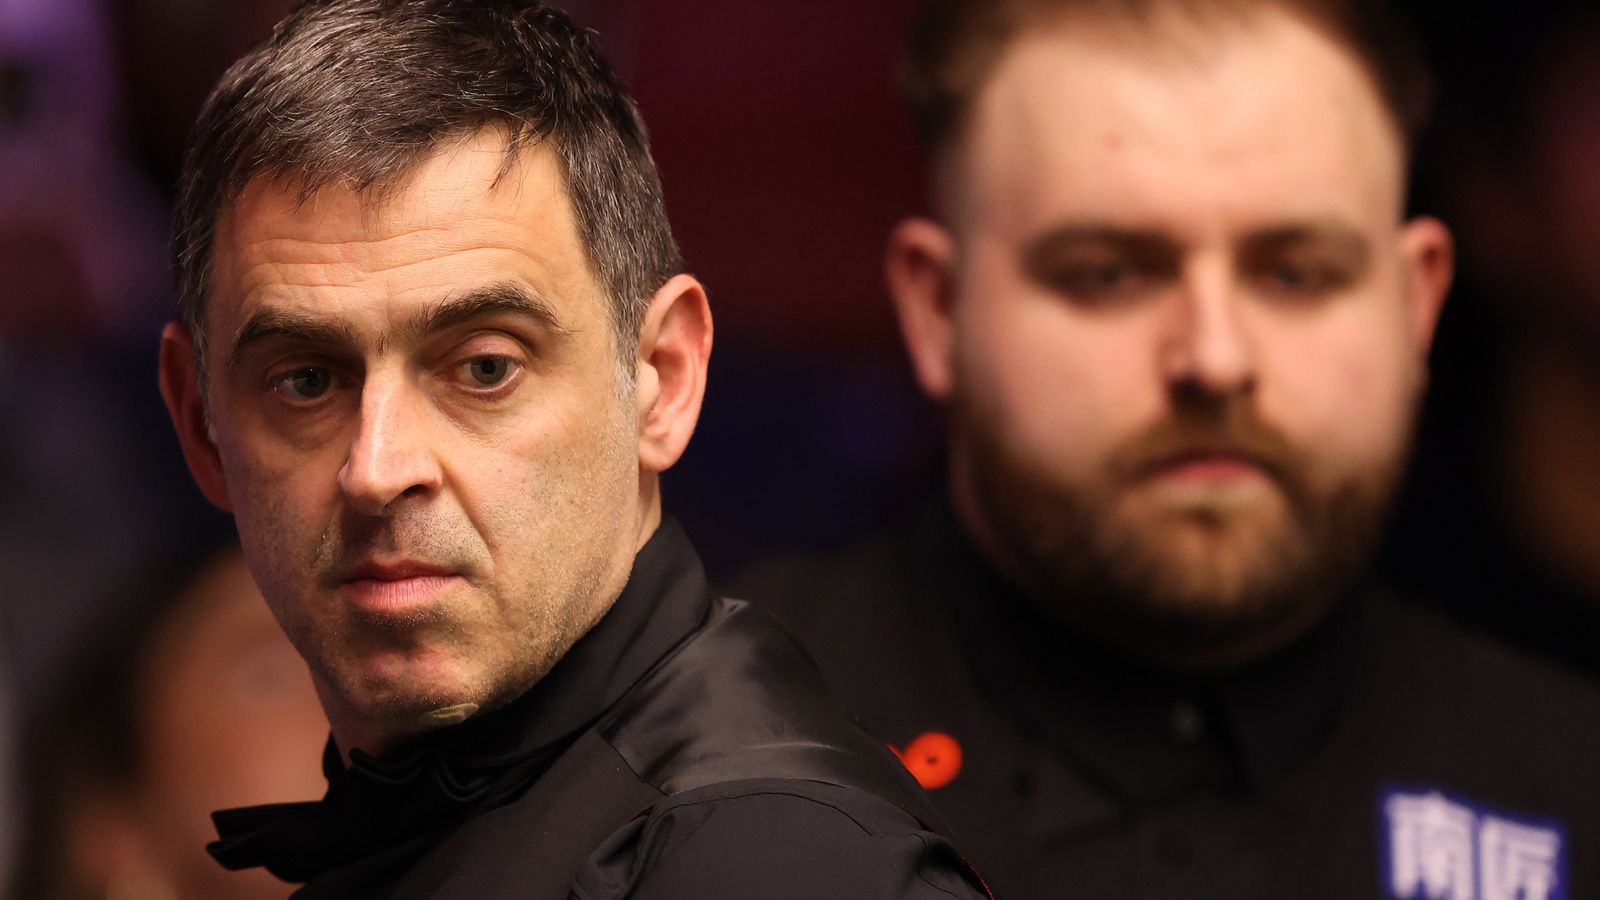 World Snooker Championship: Ronnie O'Sullivan on brink of second round after dominant start against Jackson Page | Snooker News